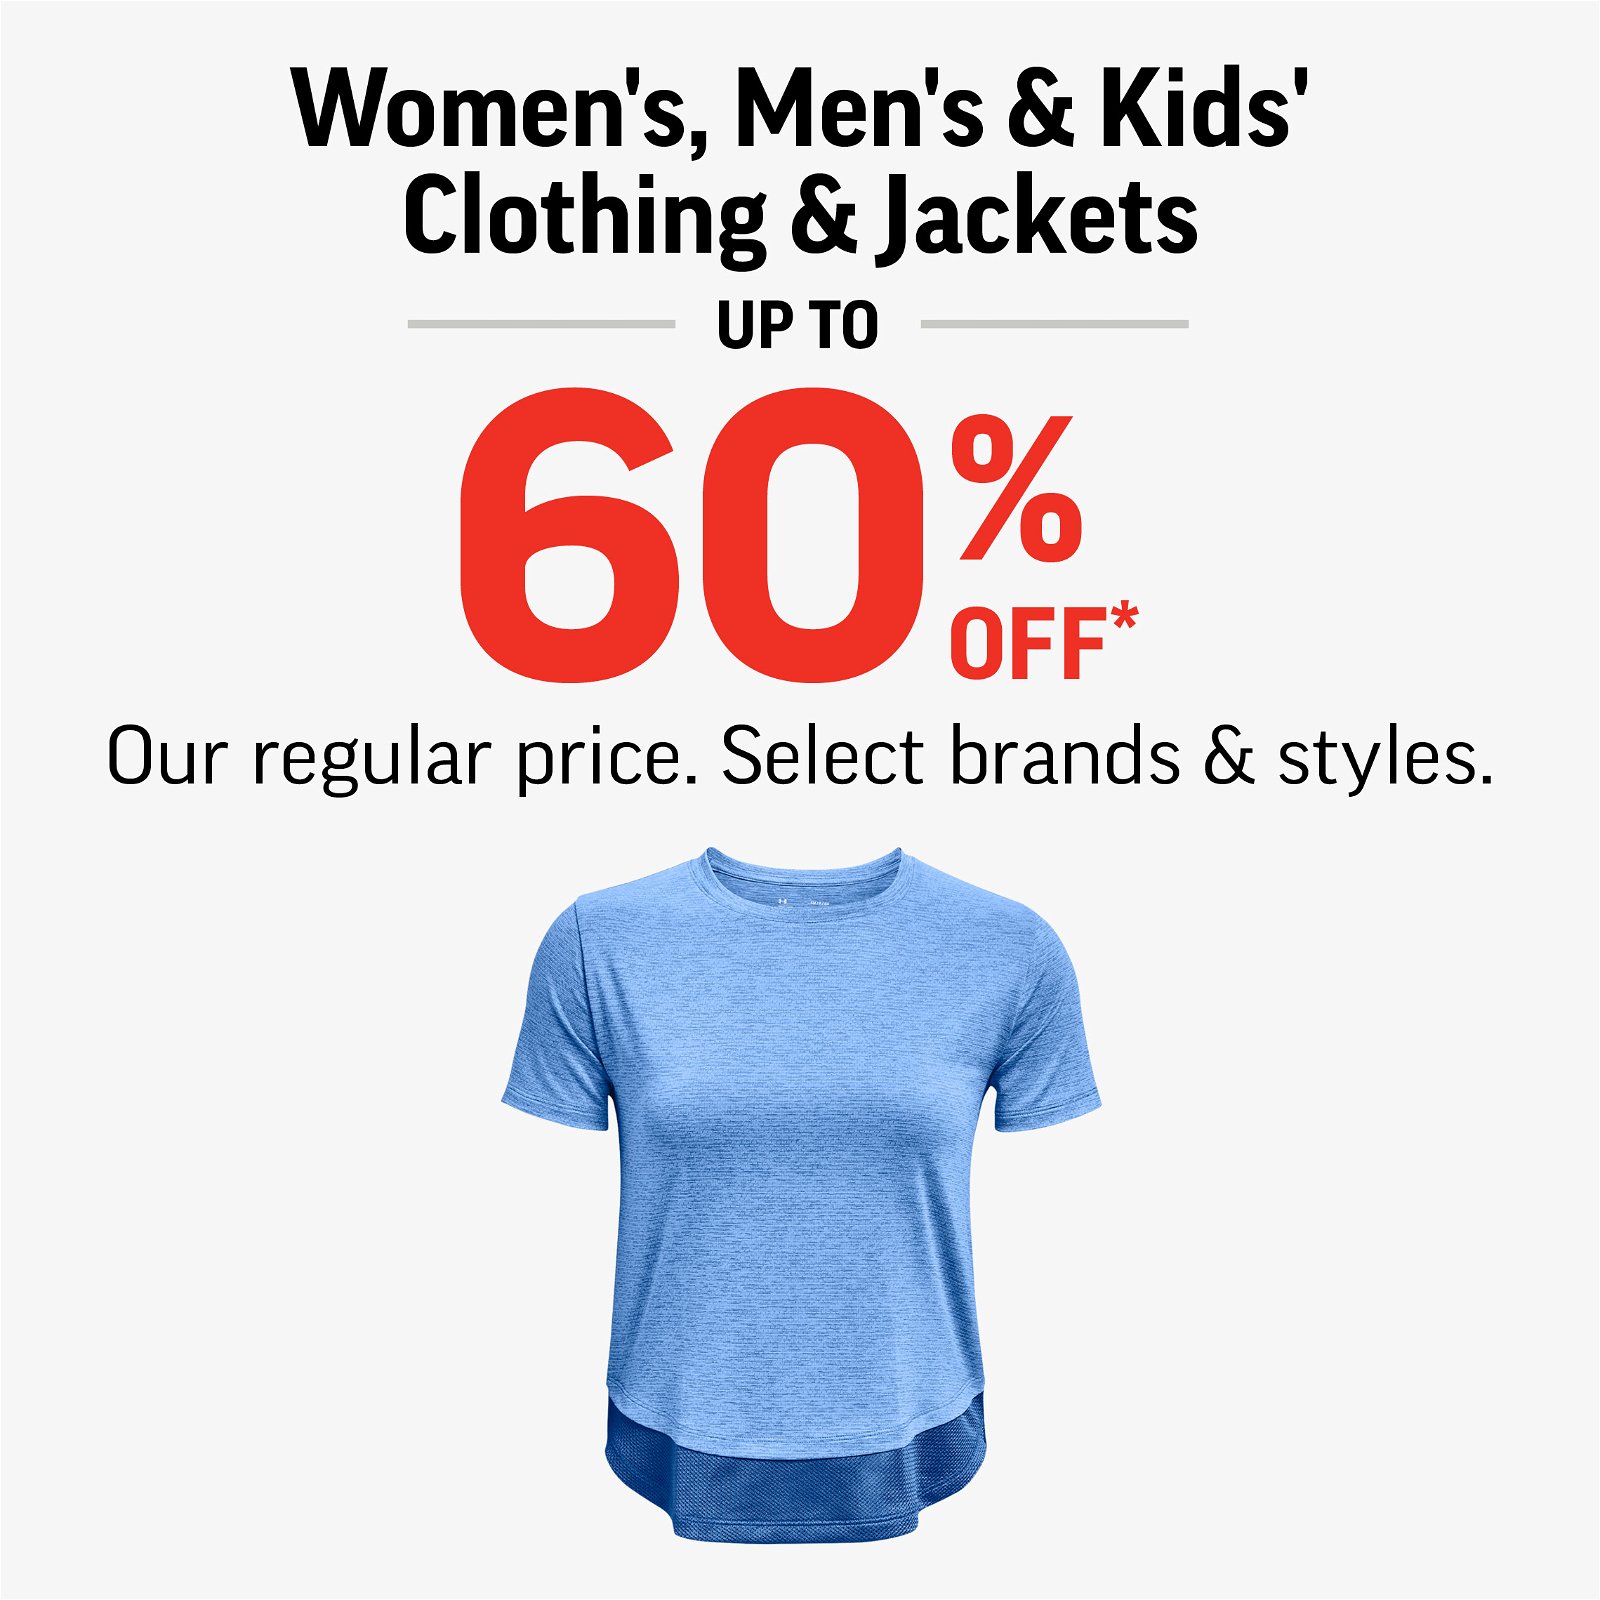 WOMEN'S, MEN'S & KIDS' CLOTHING & JACKETS UP TO 60% OFF 